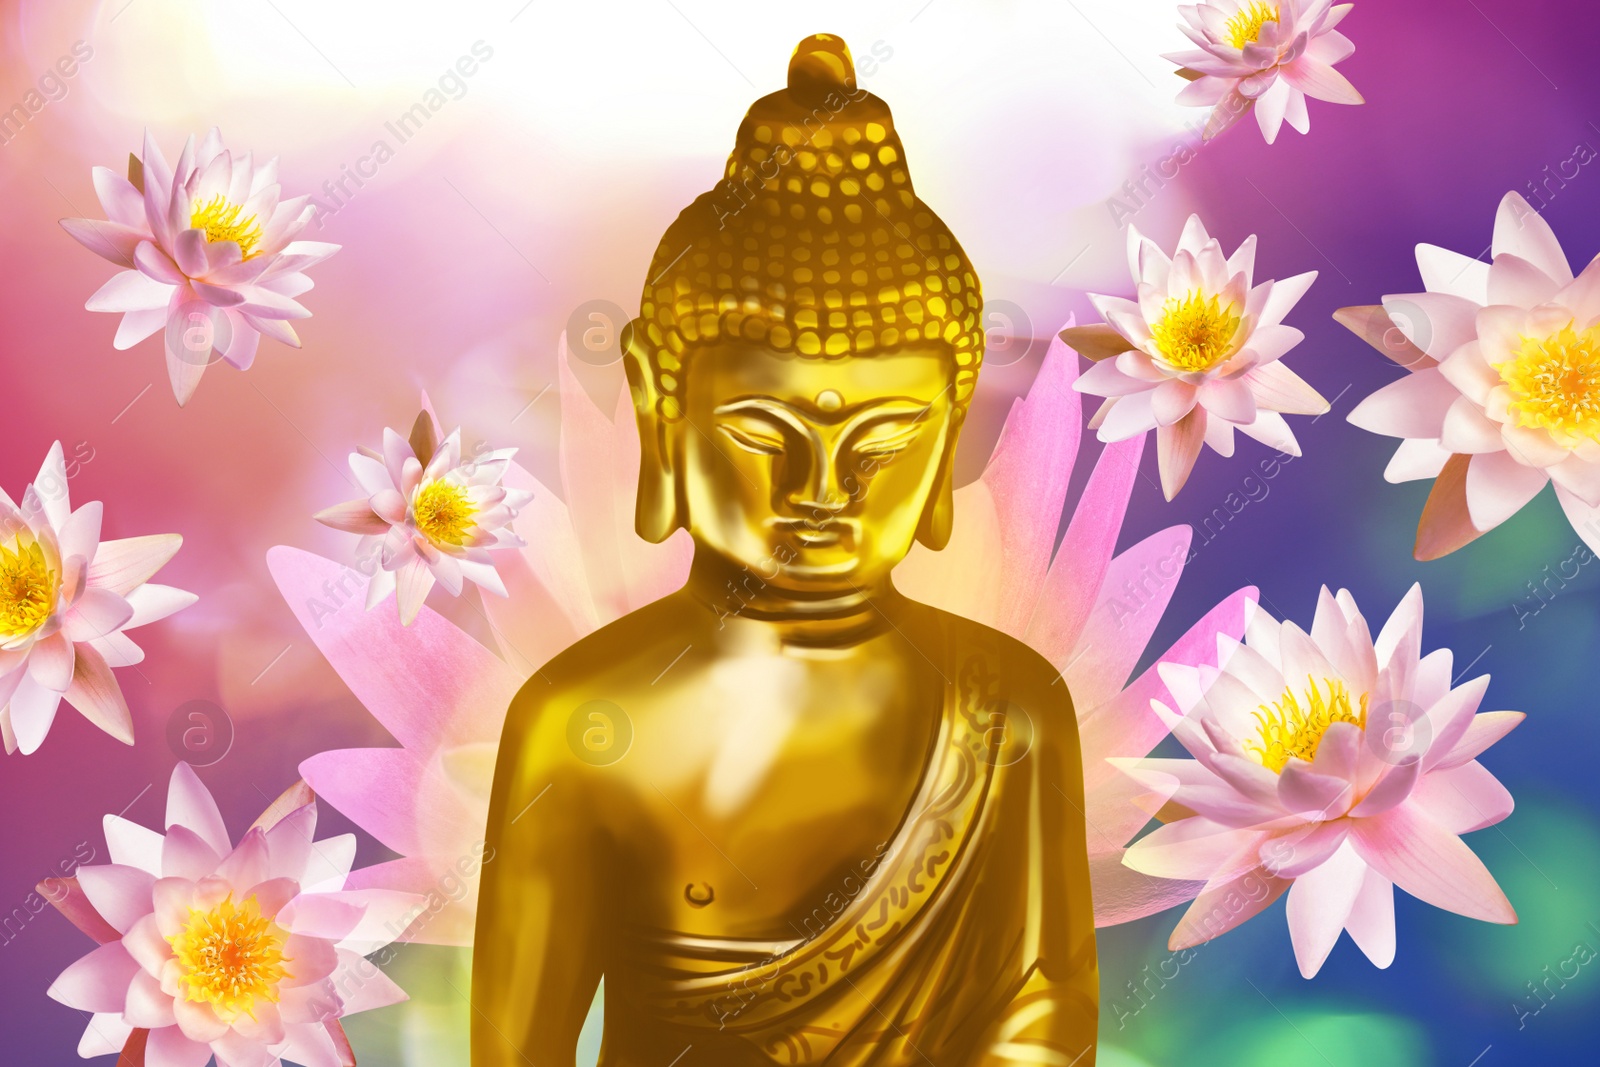 Image of Buddha figure surrounded by lotus flowers on bright background